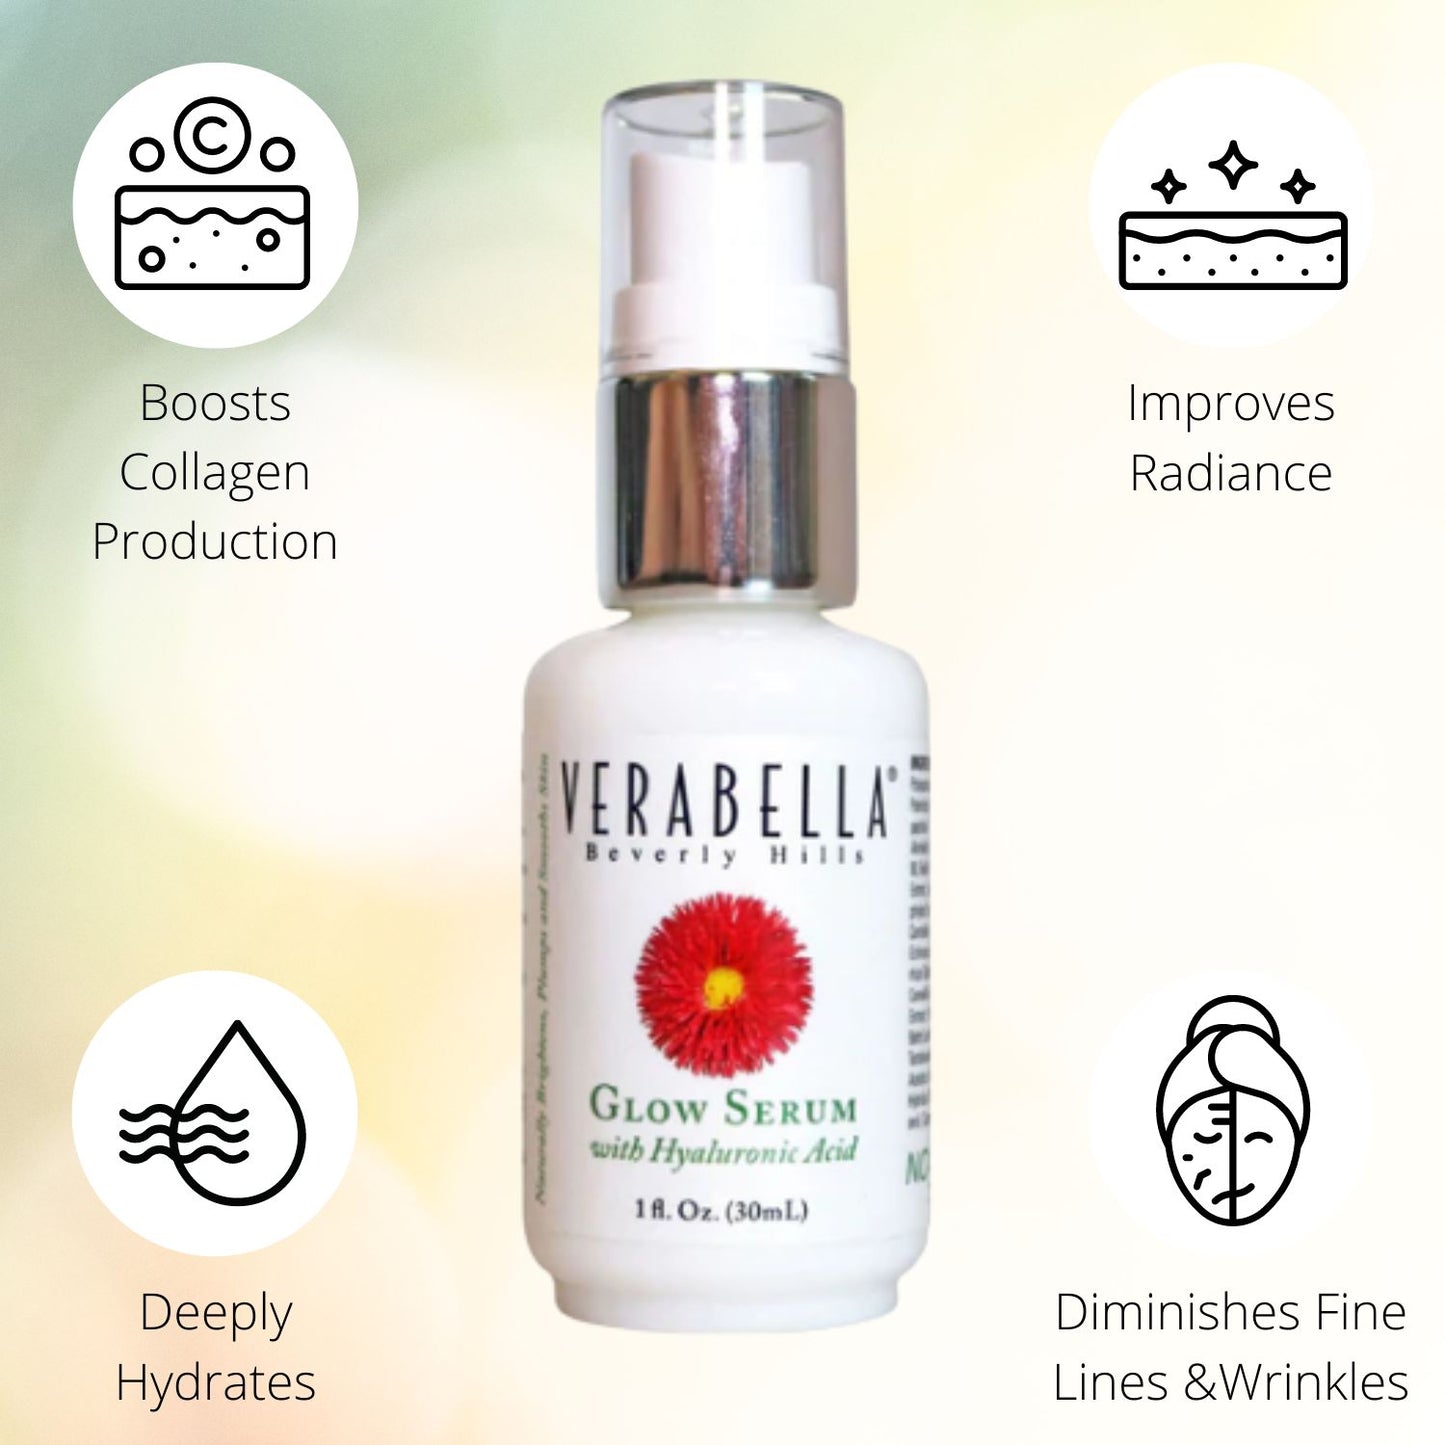 Verabella Glow Serum with Hyaluronic Acid boosts collagen and diminishes fine lines and wrinkles